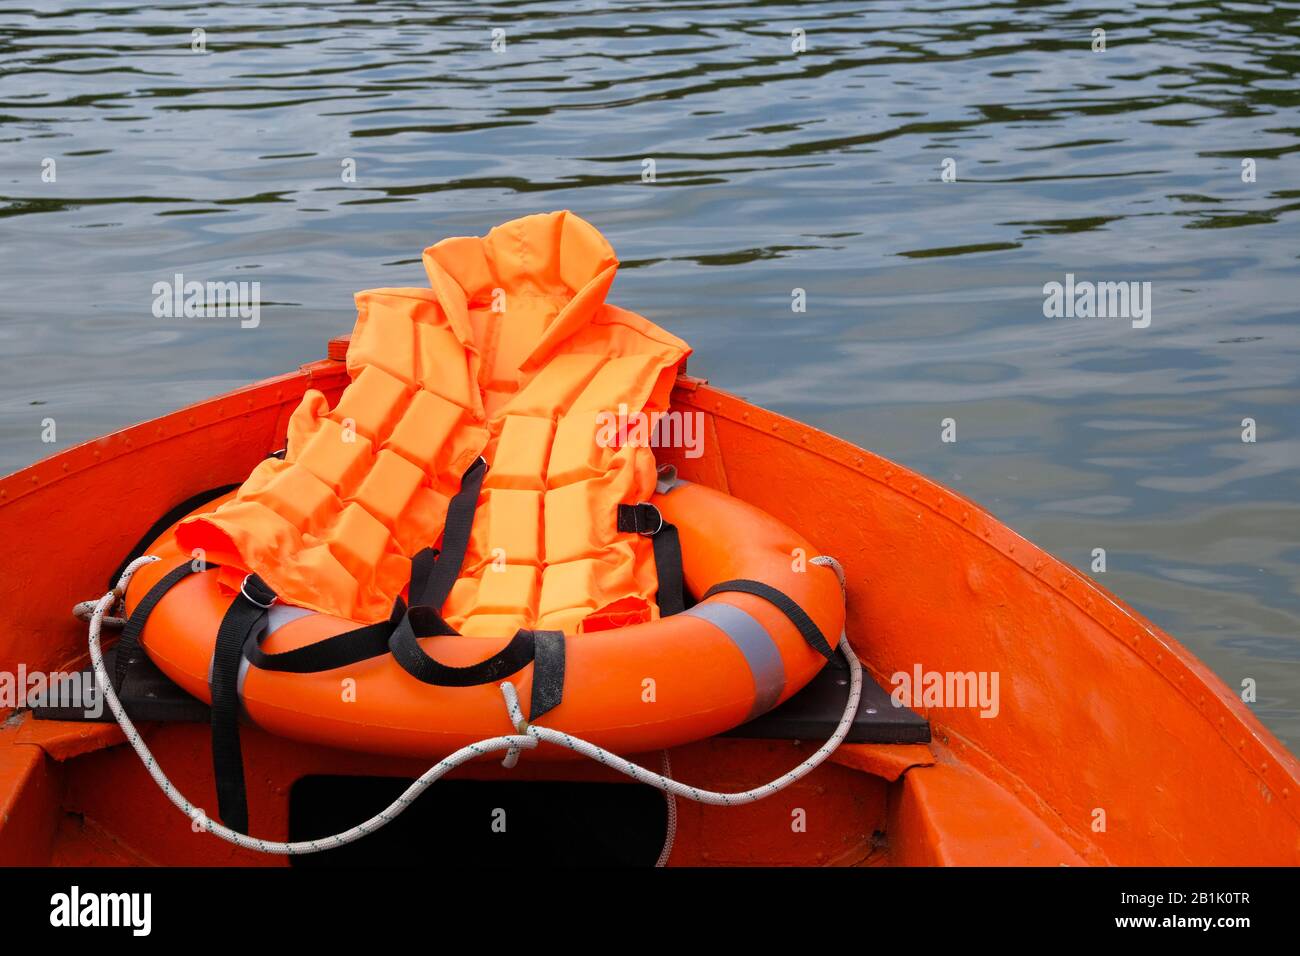 Outfit of lifeguard on water in summer boat, life jacket, lifebuoy in orange color. Concept rescue on water in summer. Stock Photo